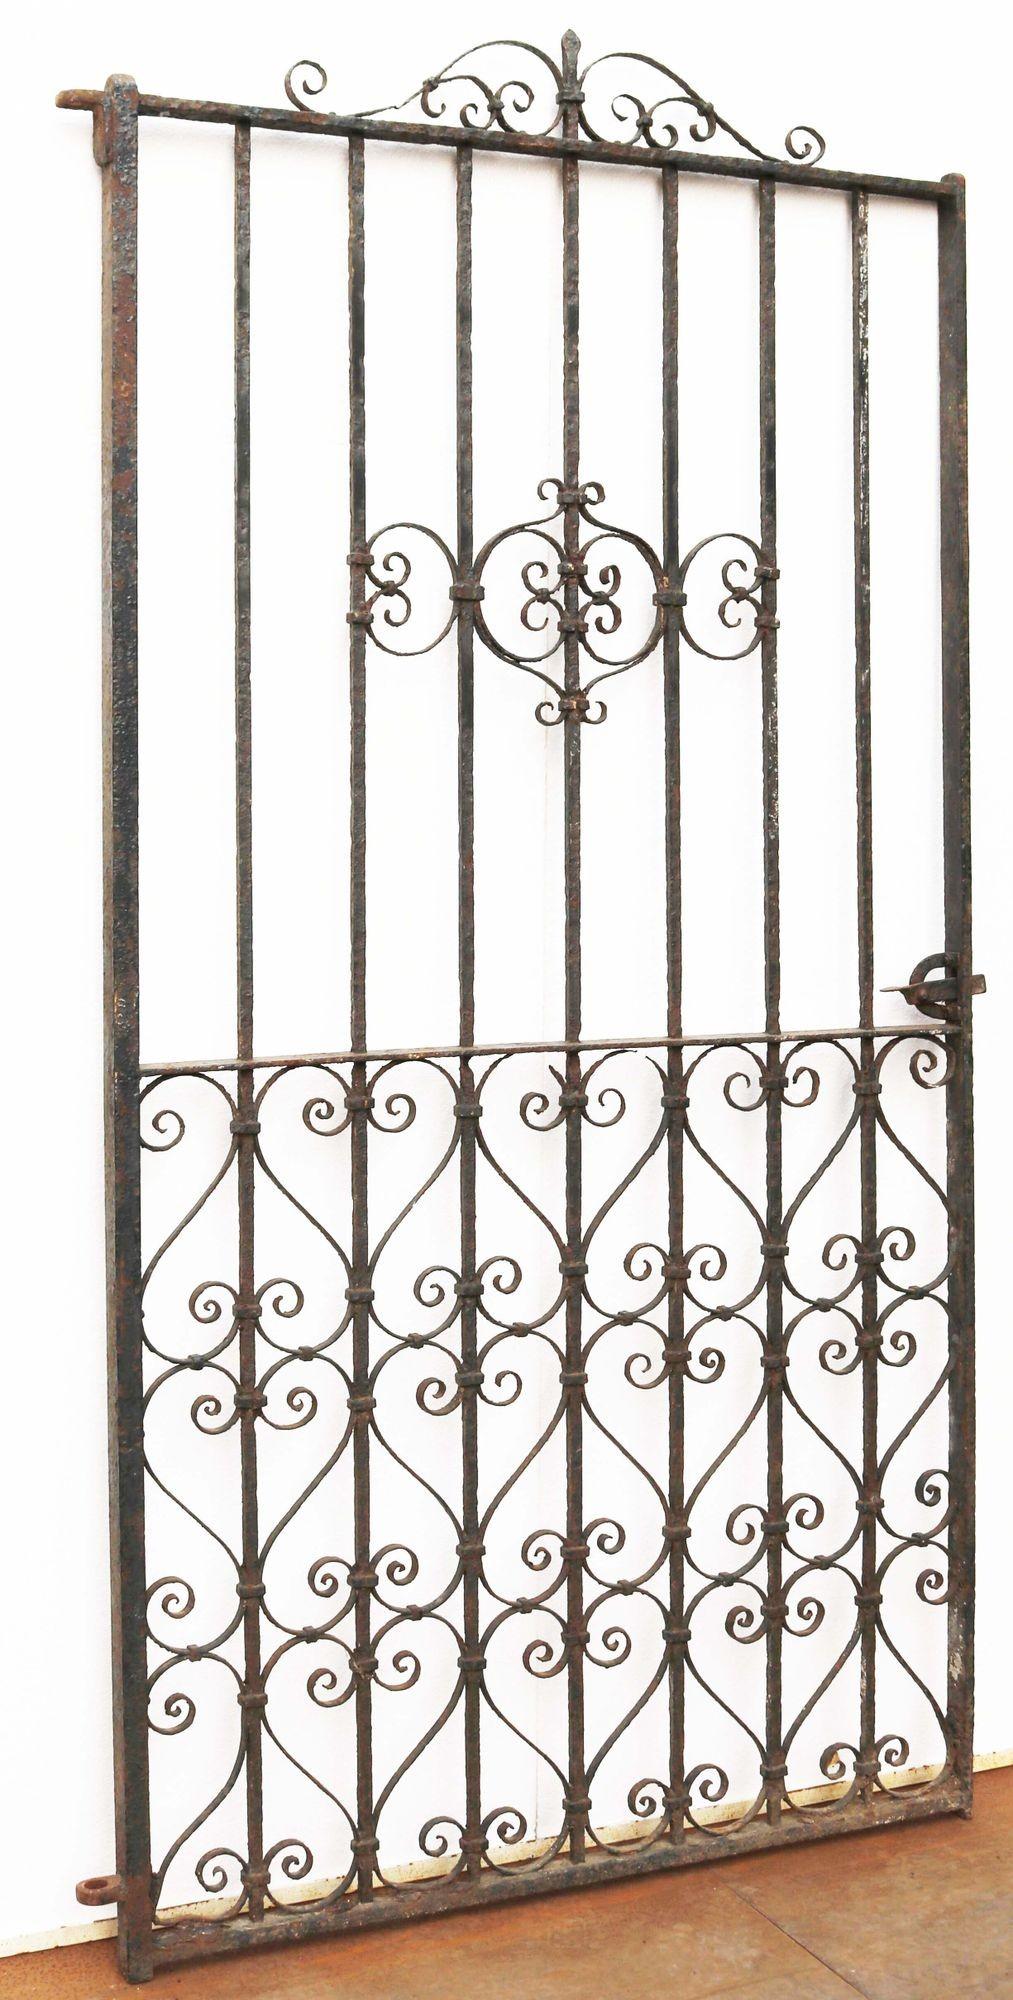 Victorian wrought iron side gate. A beautiful 19th century side gate with decorative scrollwork in an elegant design.